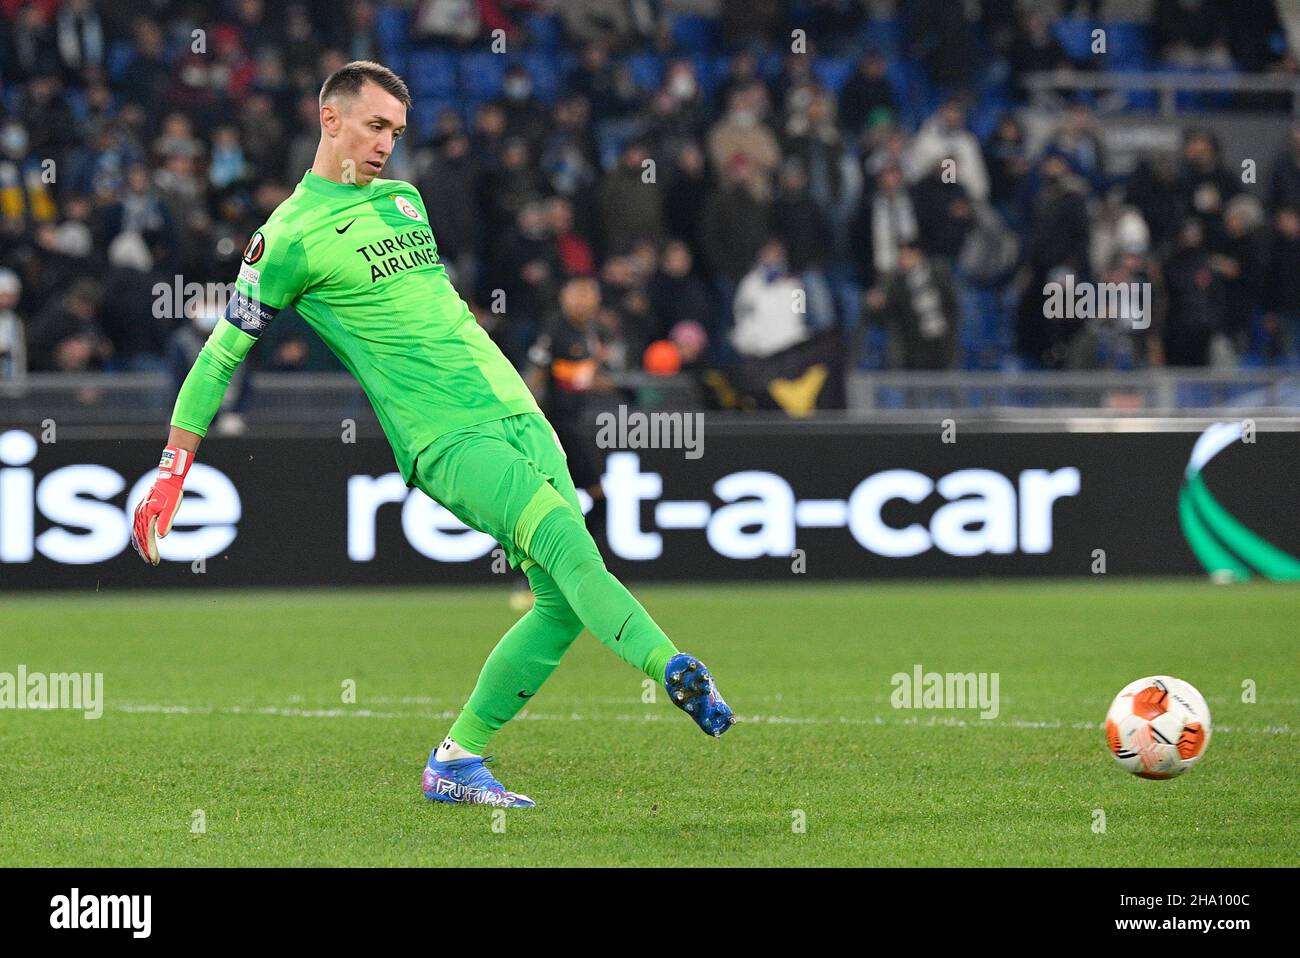 Rome, Italy. 09th Dec, 2021. Fernando Muslera (Galatasaray) during the UEFA Europa League football match between SS Lazio and Galatasaray at The Olympic Stadium in Rome on 09 December 2021. Credit: Live Media Publishing Group/Alamy Live News Stock Photo